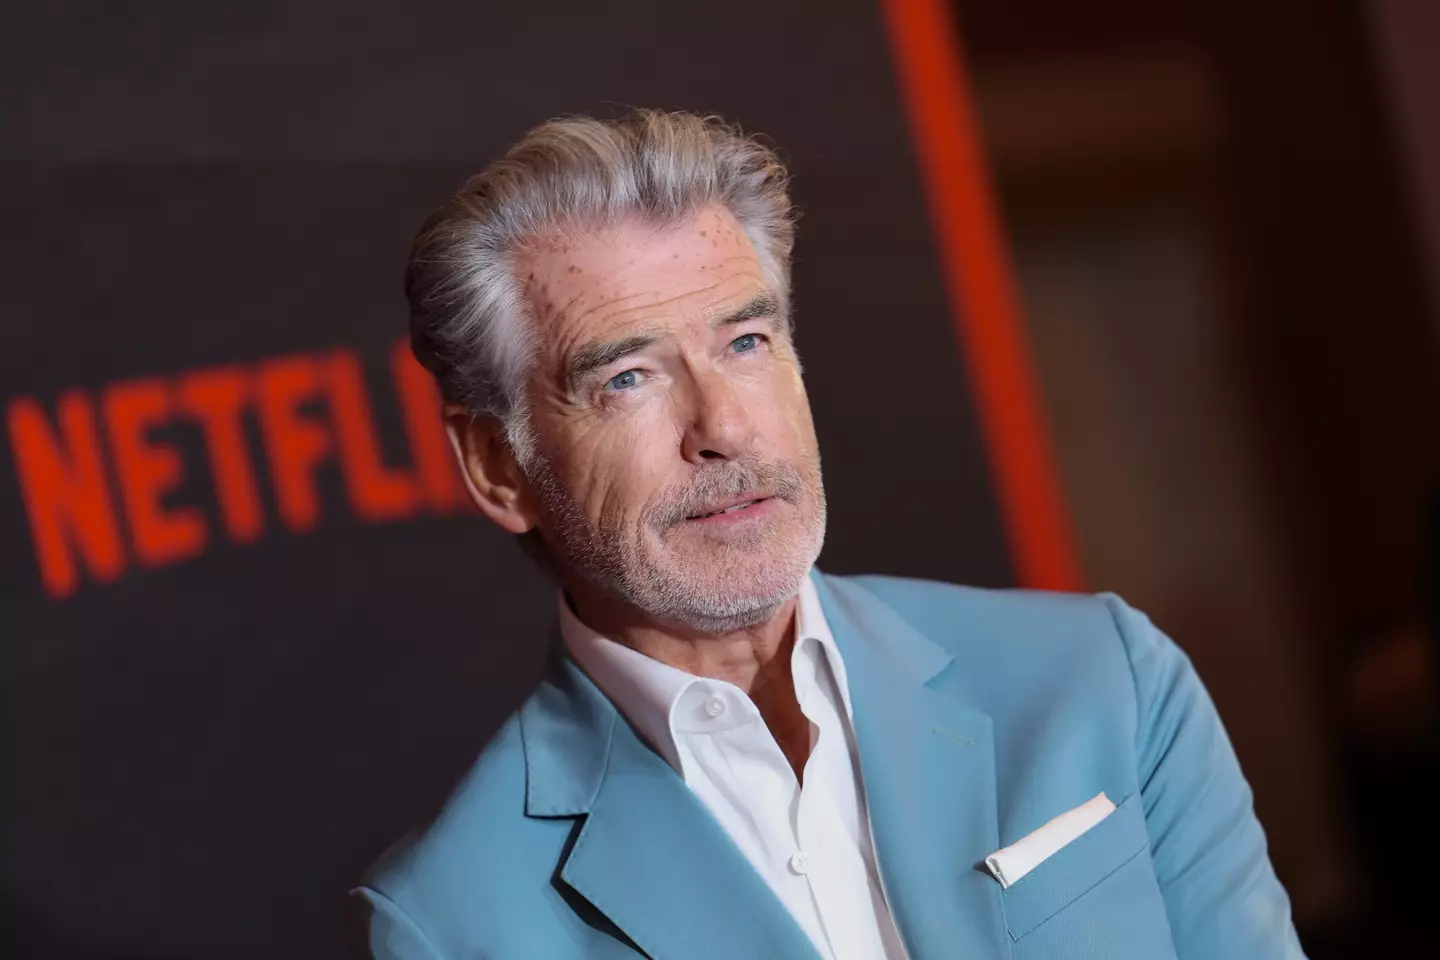 Brosnan was hit with the citations on 26 December.